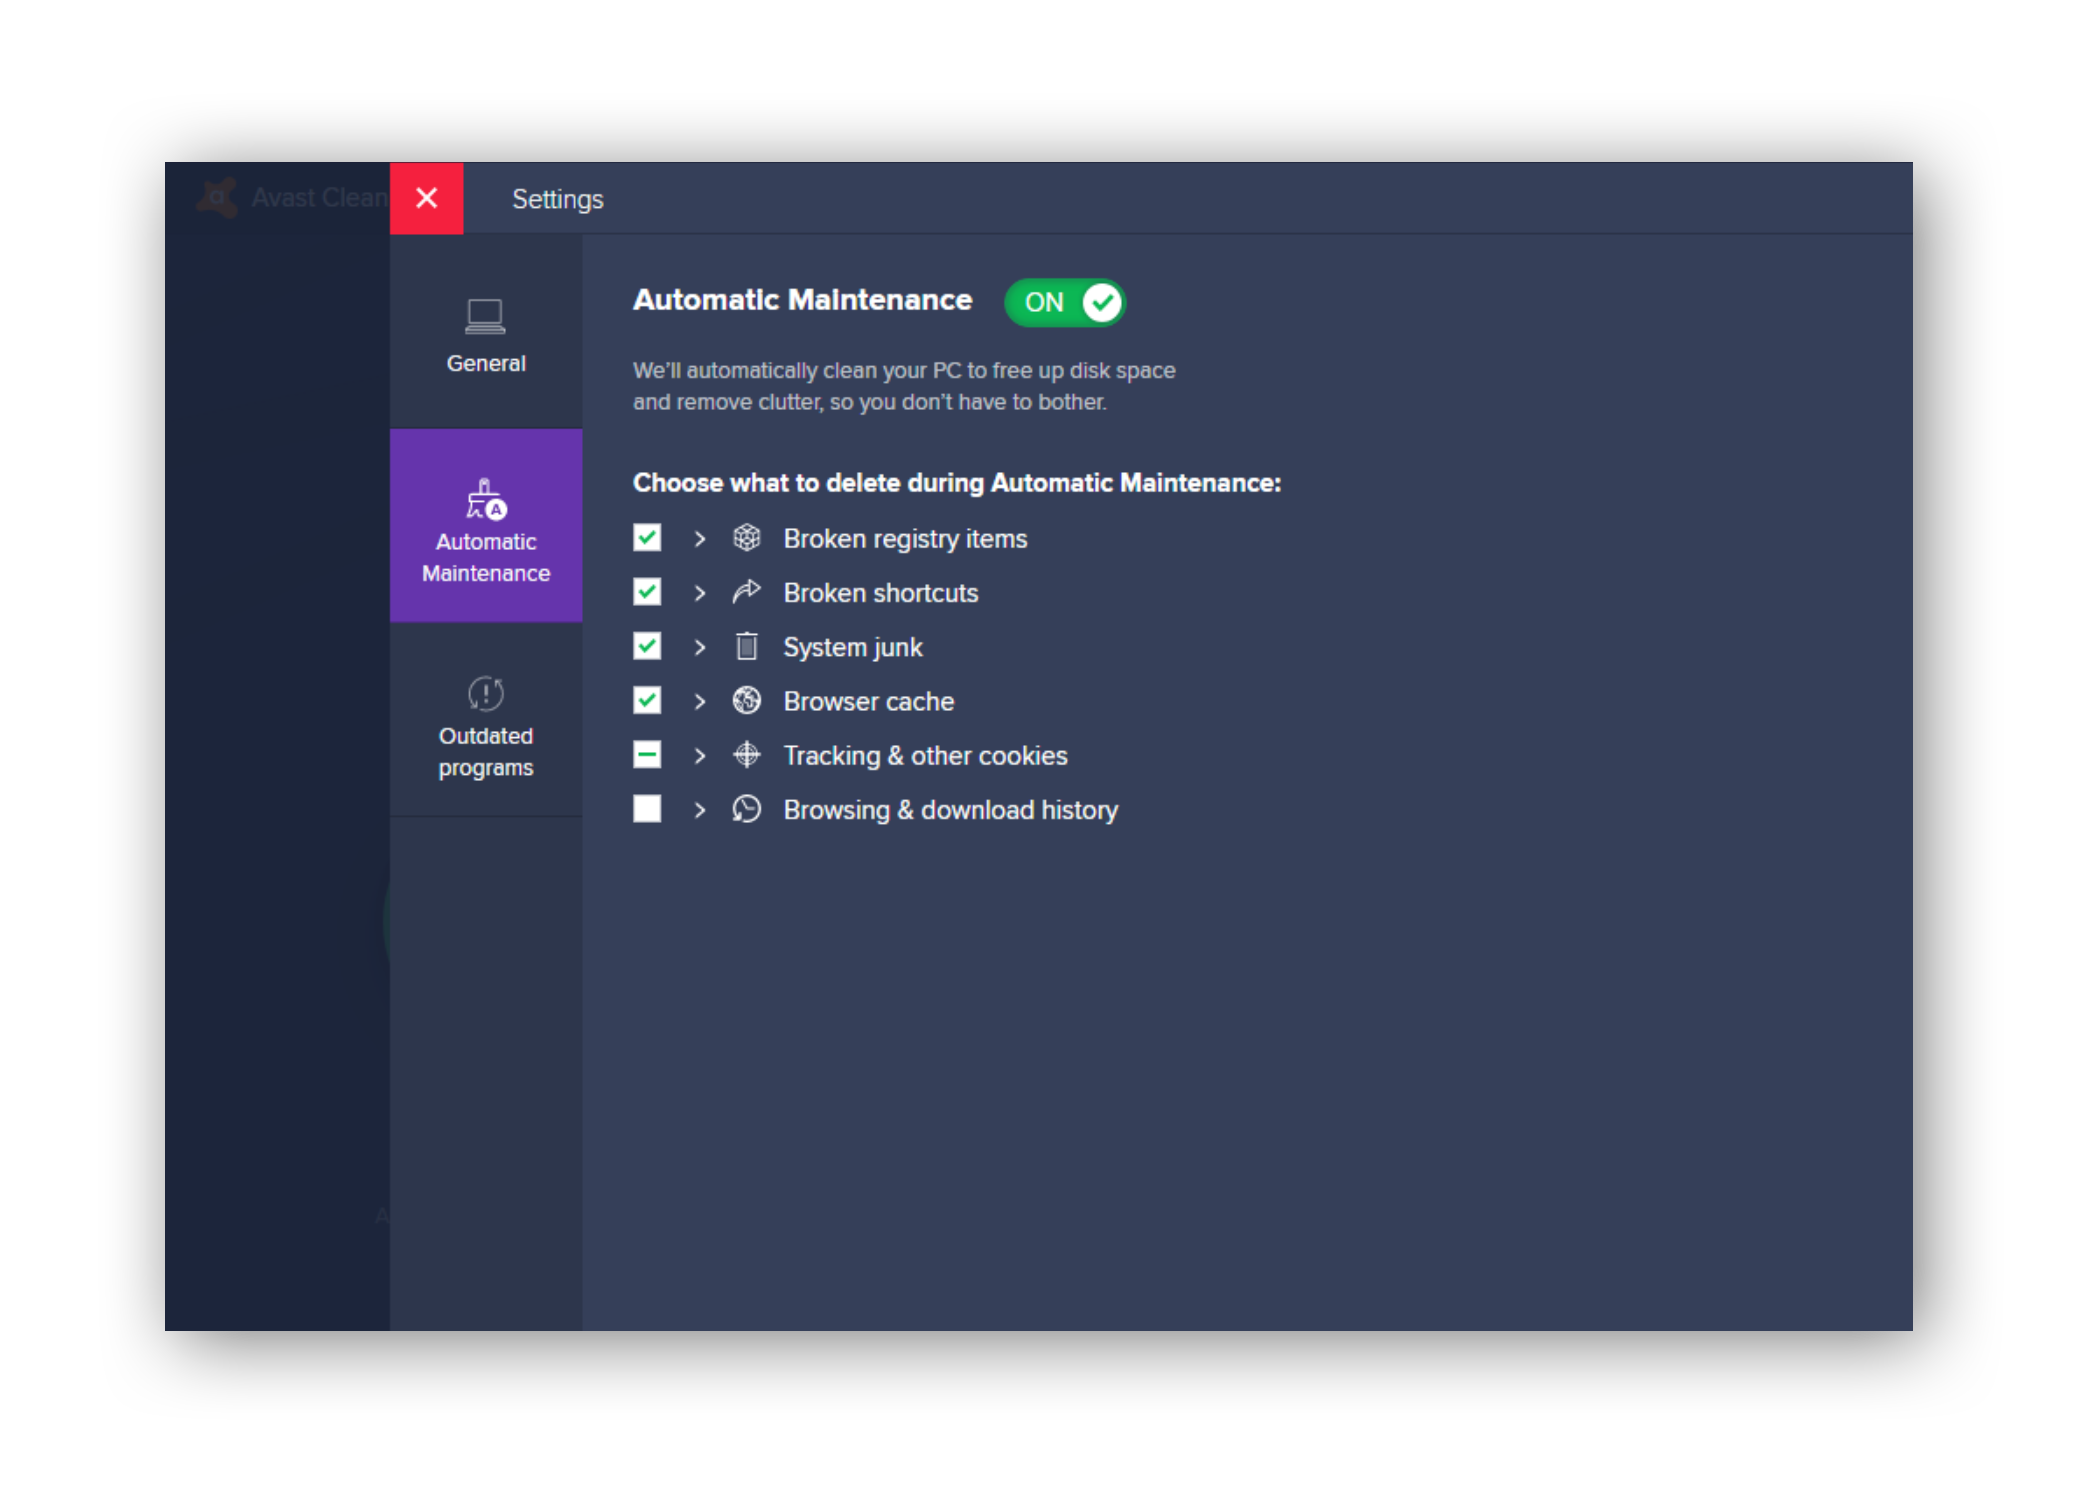 Using Automatic Maintenance in Avast Cleanup.